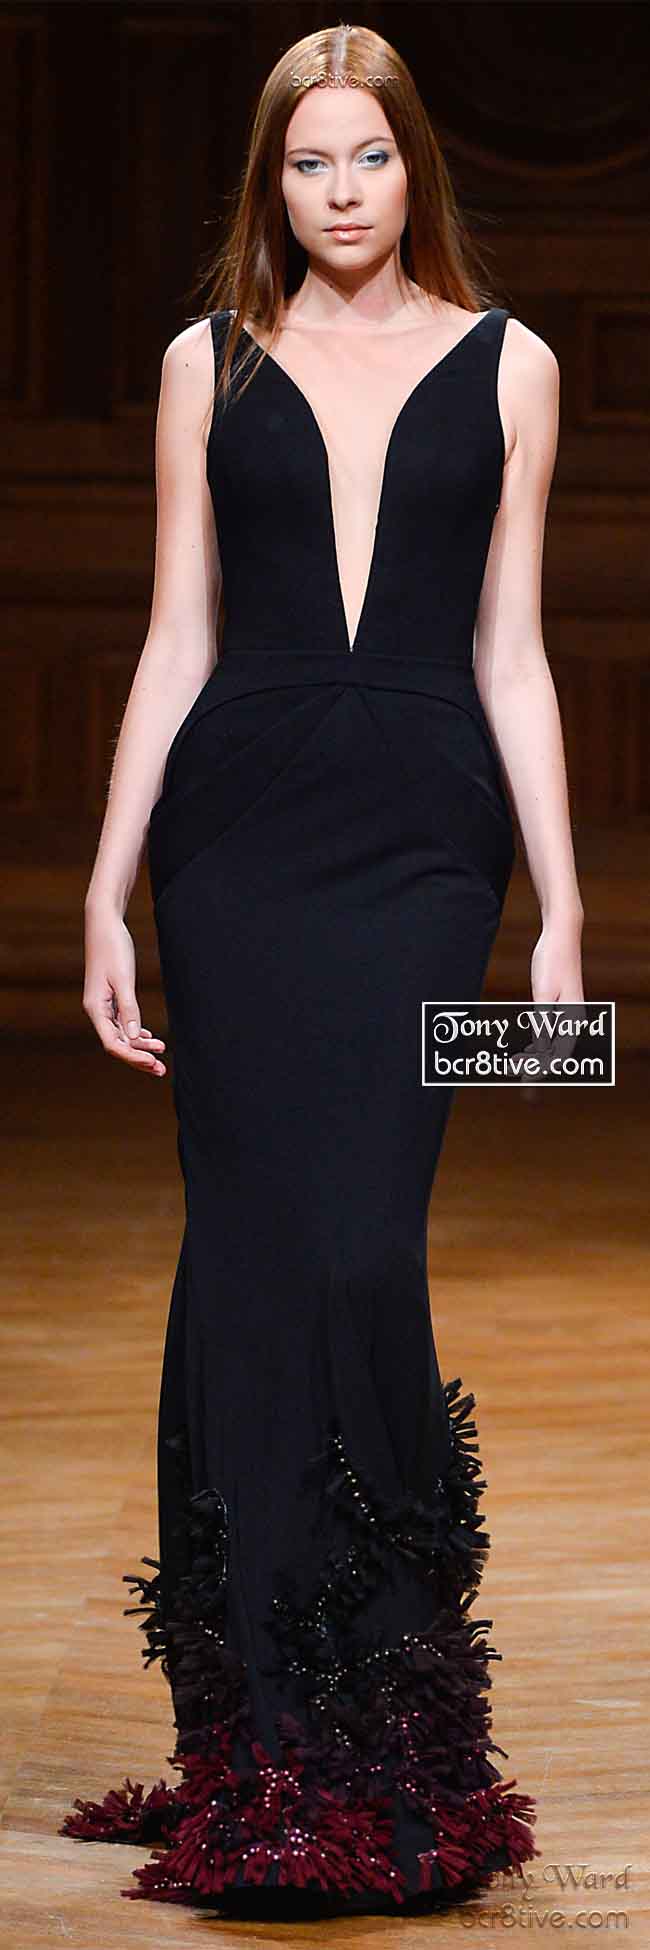 Enigmatic and Snug Black Sculpted Gown with Deep Arched Neckline and Tufted Appliqued Bottom